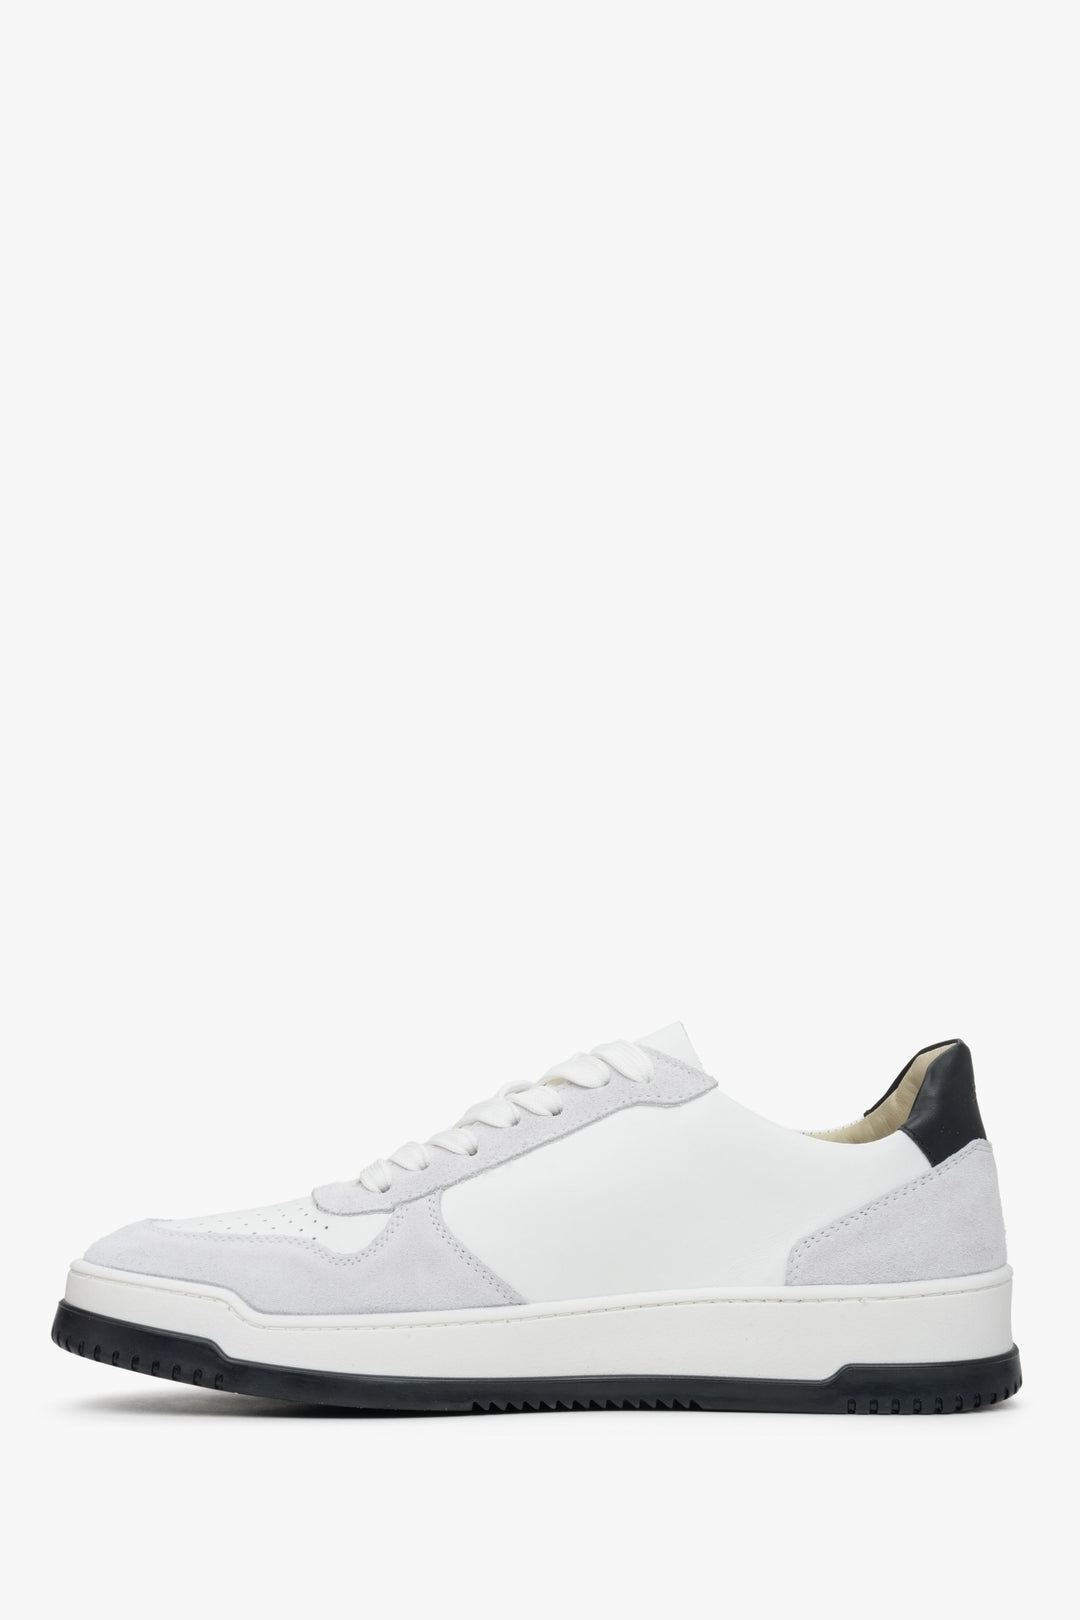 Men's white and grey suede and natural leather Estro sneakers - spring shoe profile.